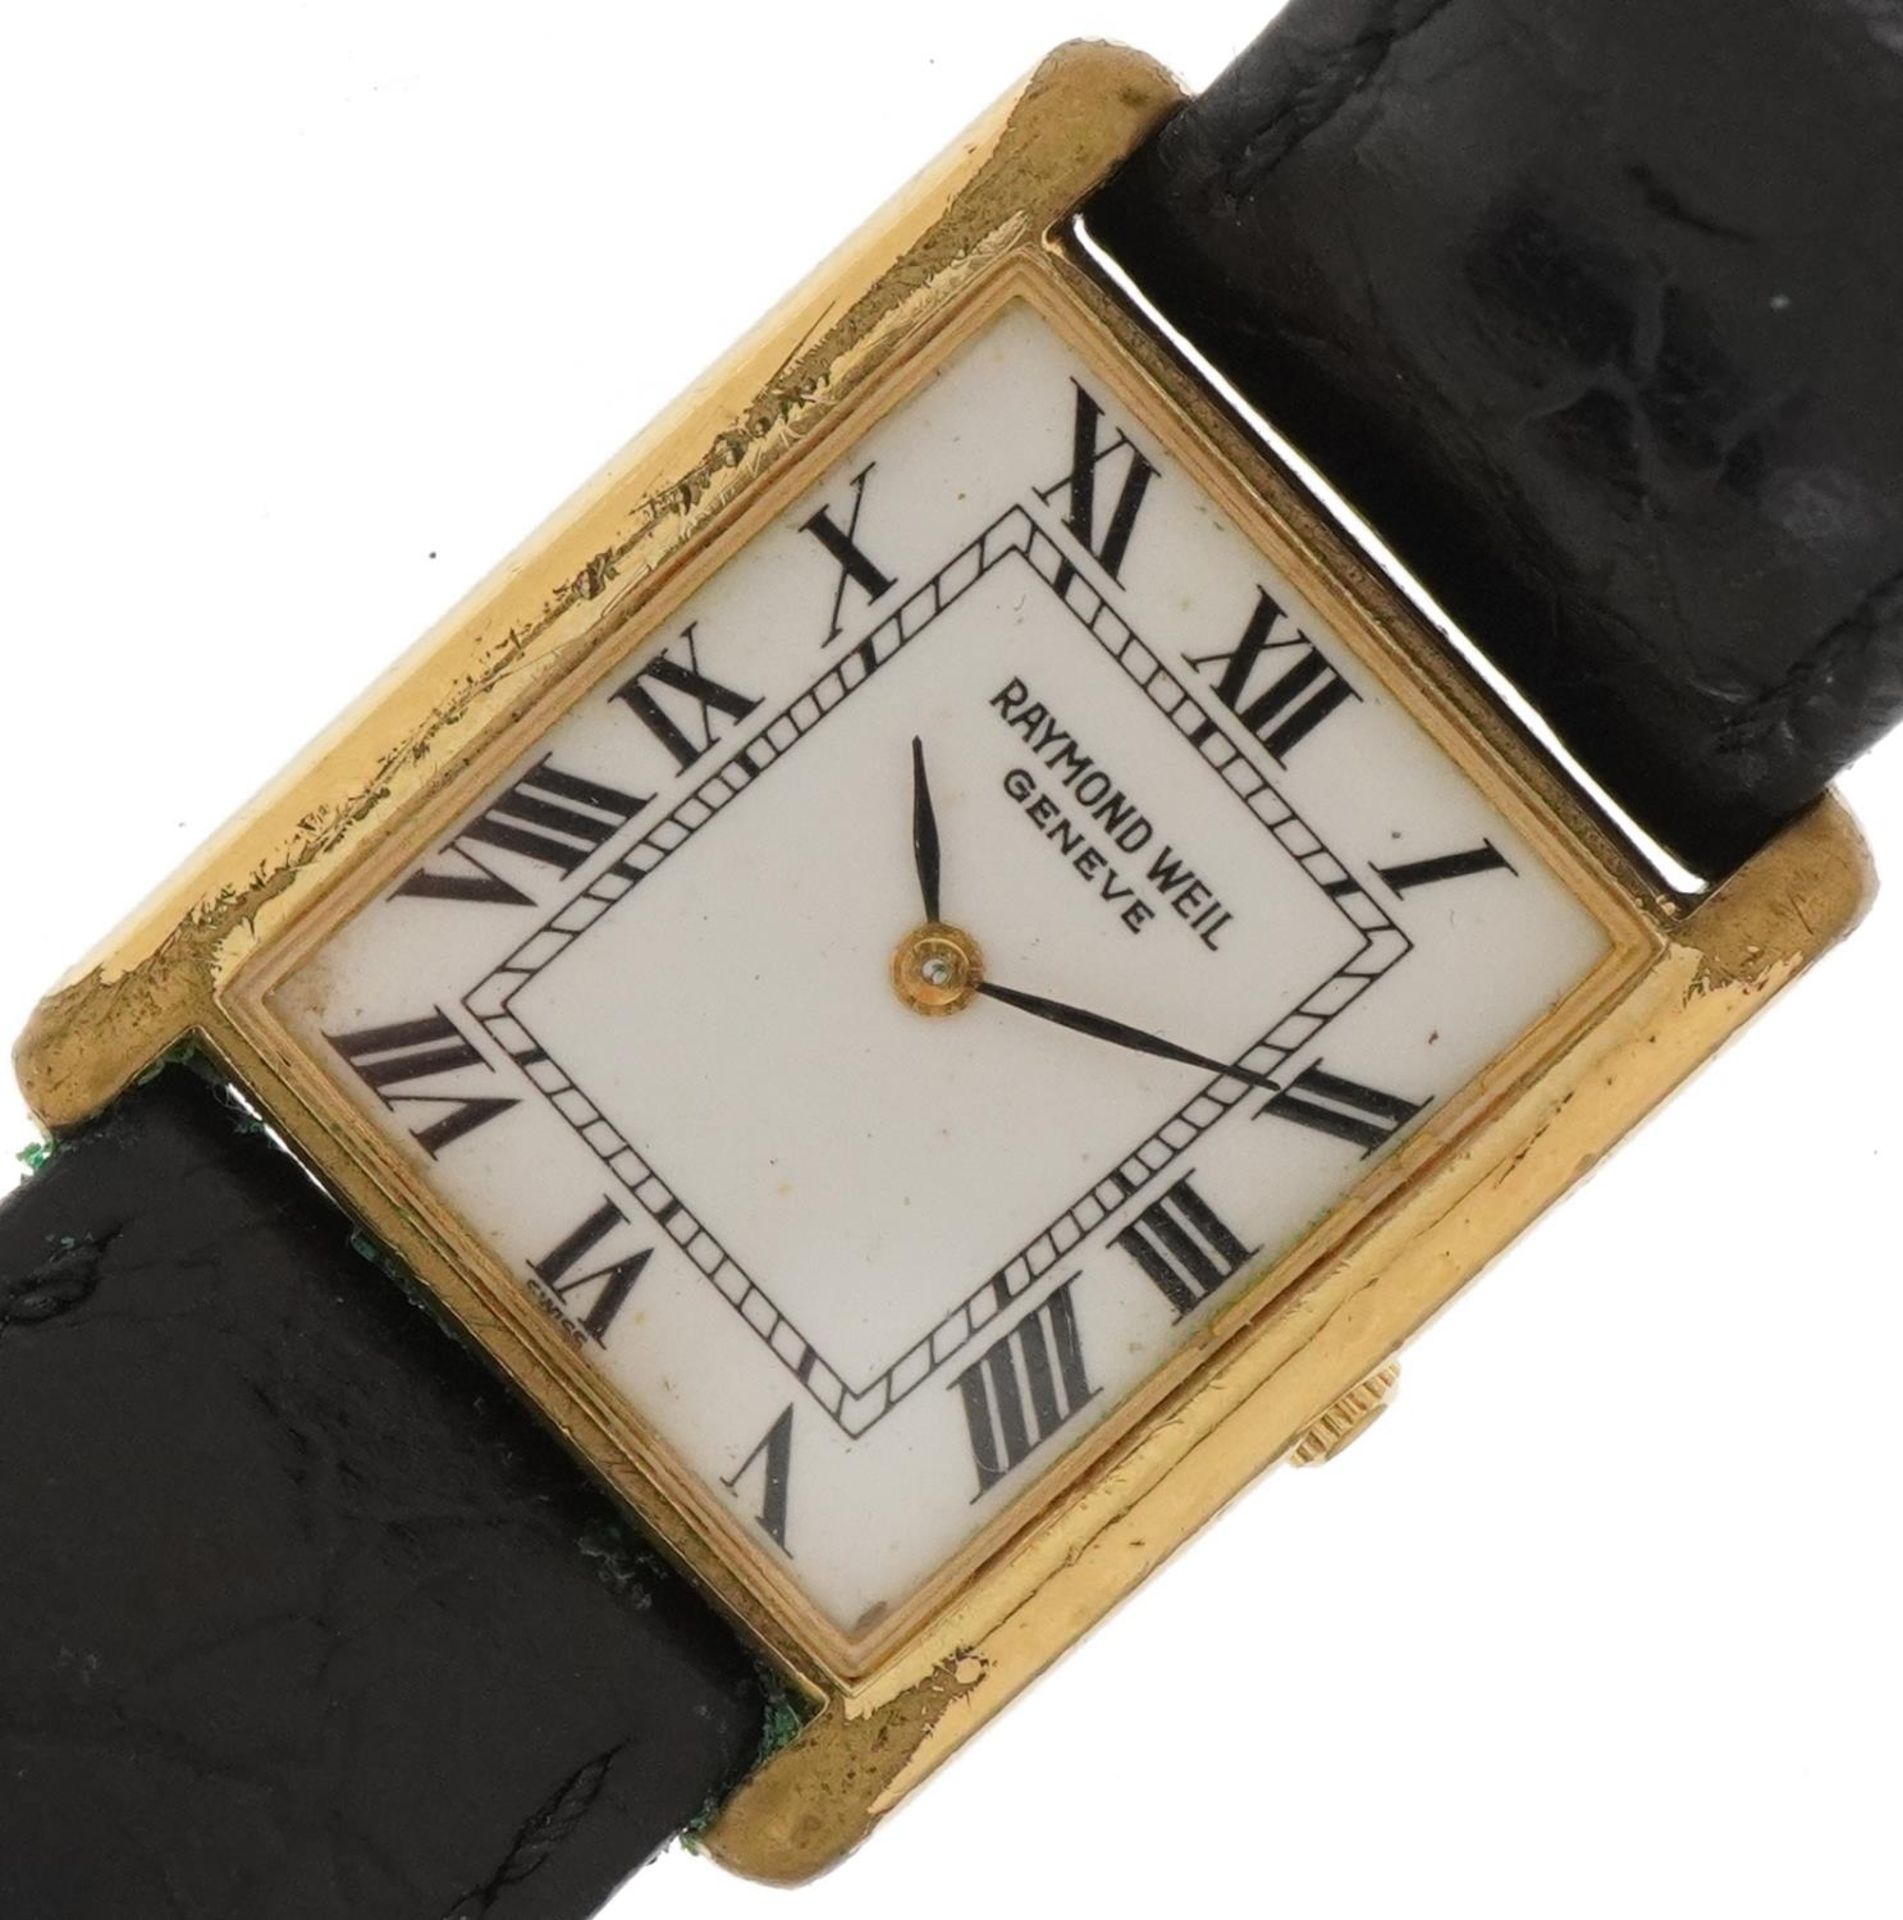 Raymond Weil, gentlemen's 18ct gold plated wristwatch, the case 23mm wide : For further